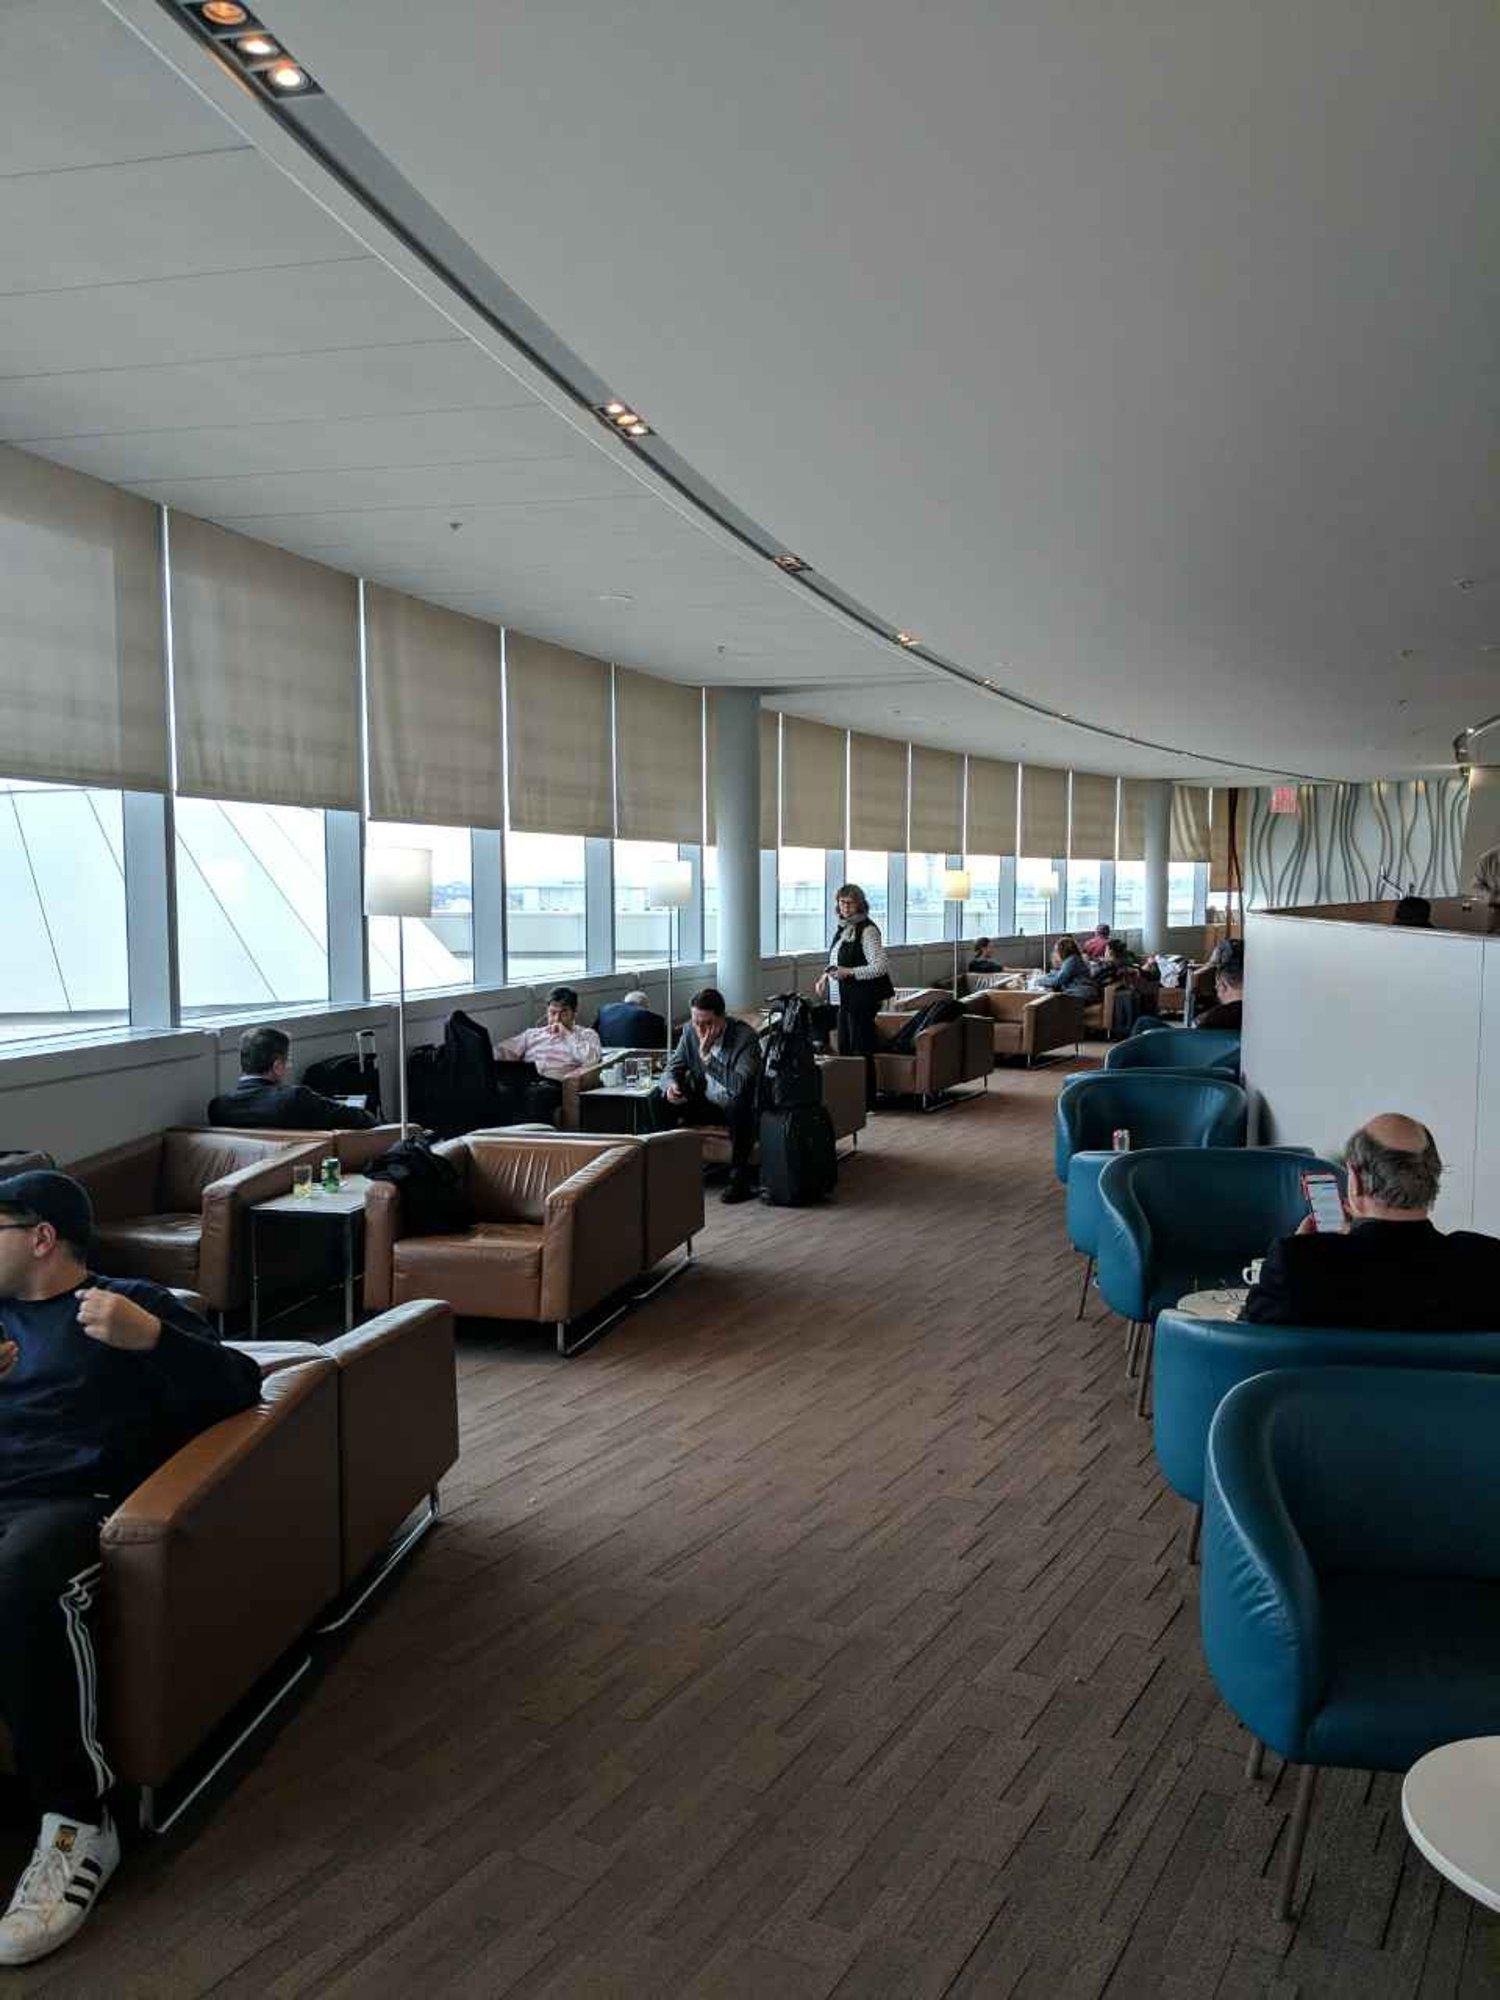 Air Canada Maple Leaf Lounge image 9 of 30